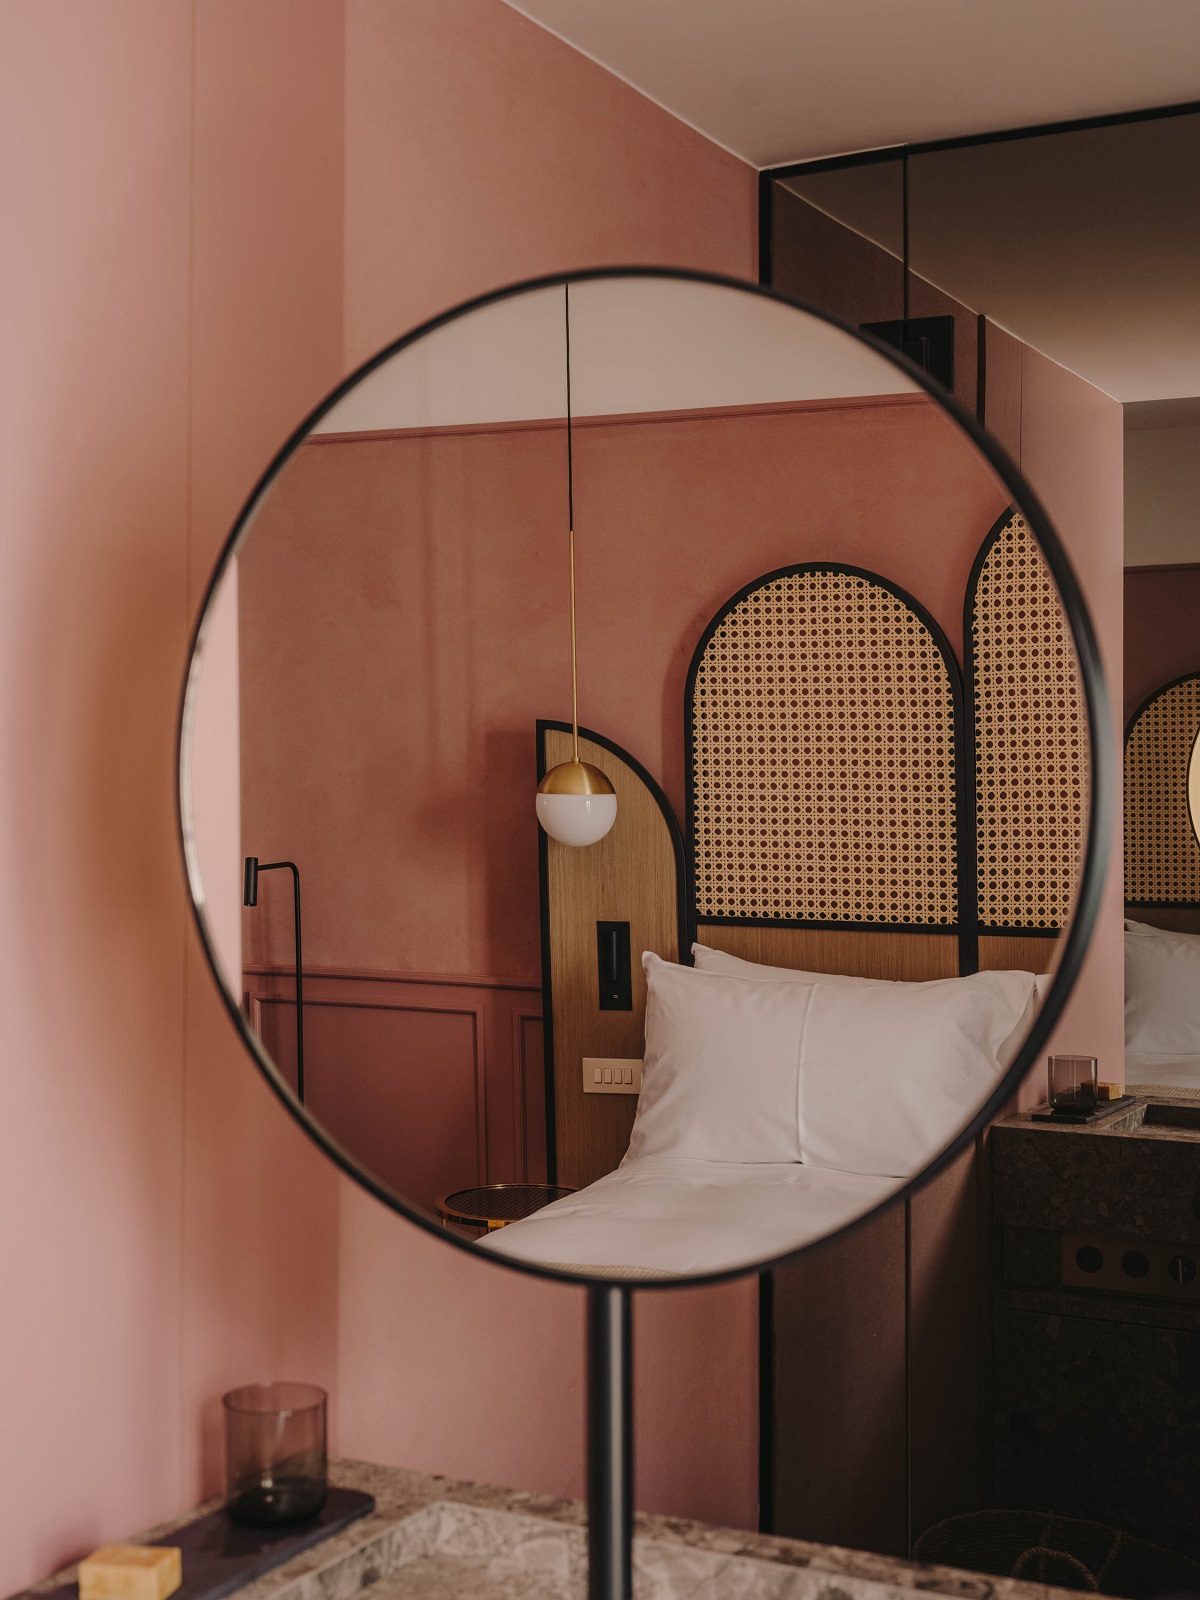 round mirror in bedroom reflecting plaster pink walls and rattan headboard